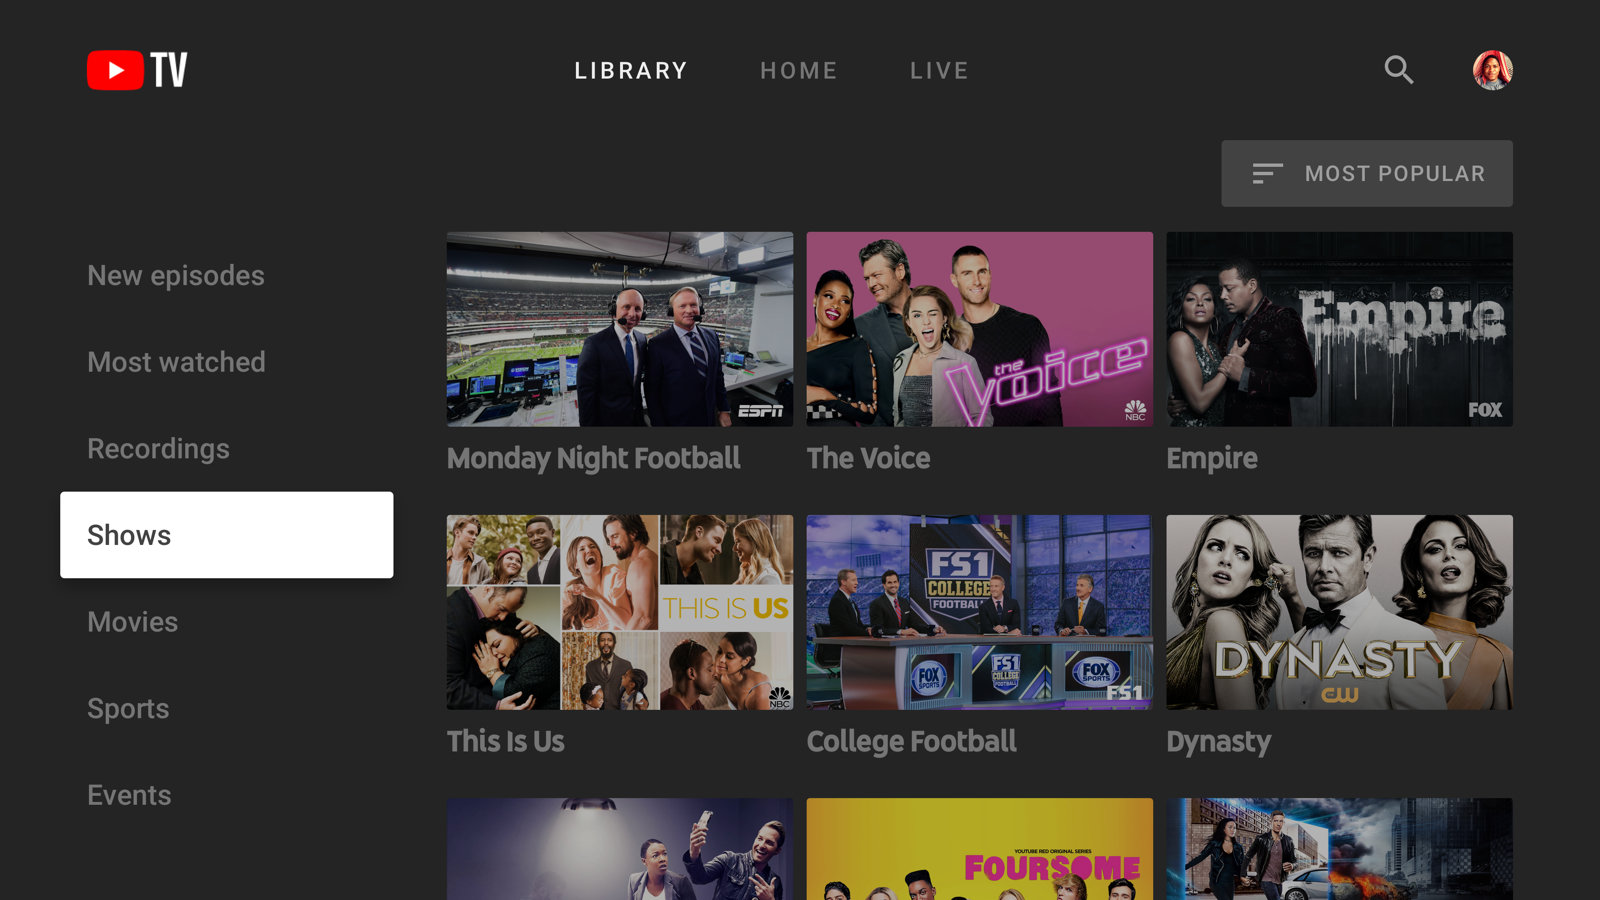 YouTube TV planning to up picture quality to 1080p - Digital TV Europe